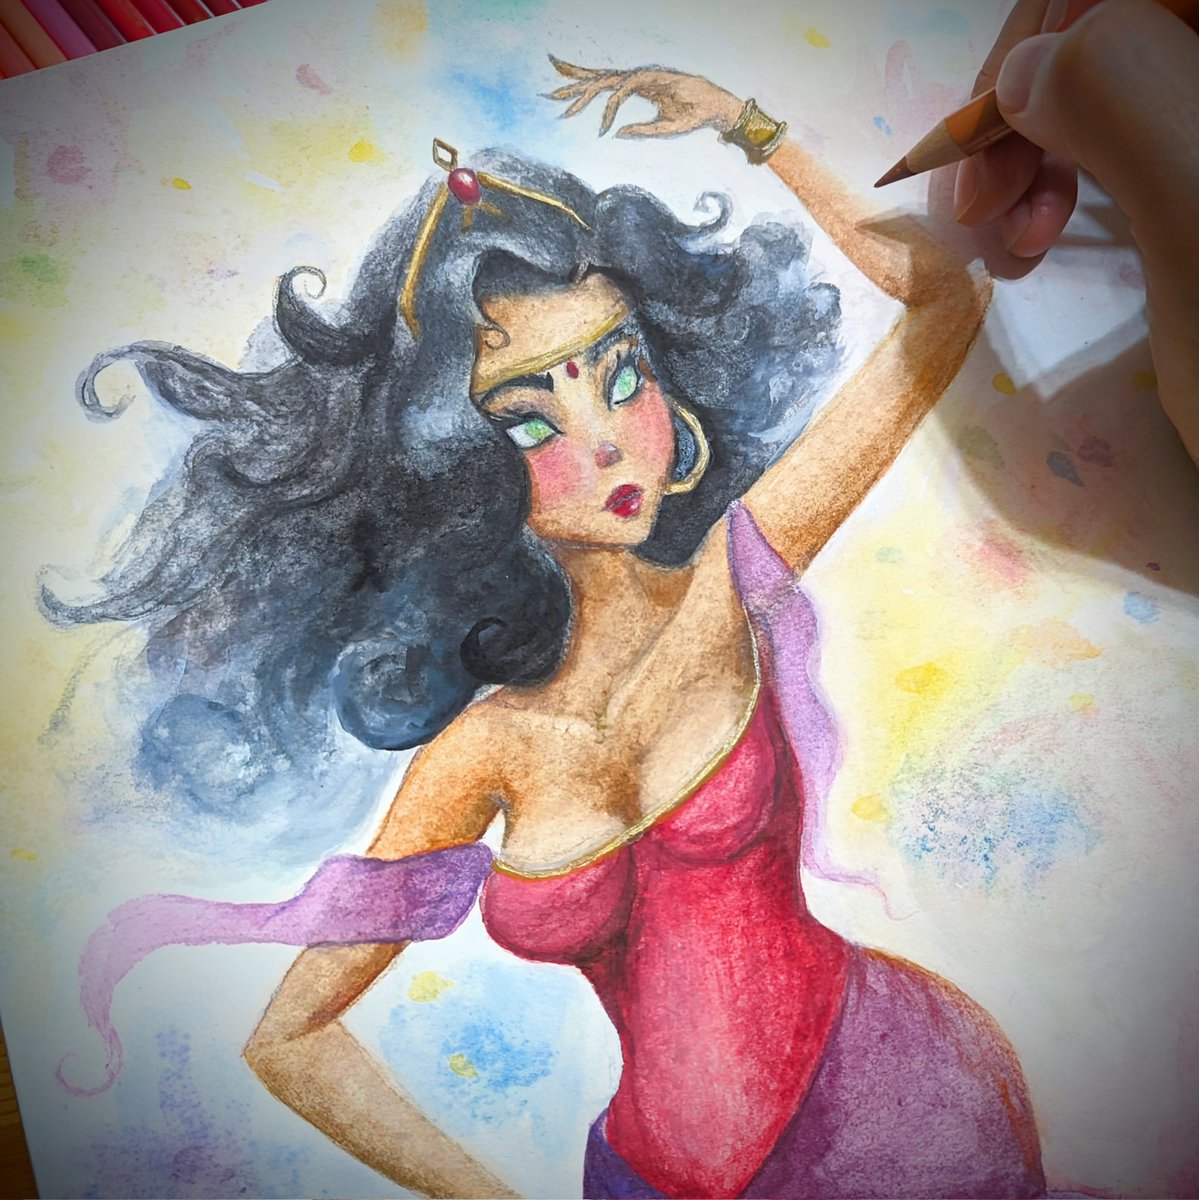 Finishing up a watercolor/color pencil commission before heading off to Emerald City Comic Con! #esmeralda #hunchbackofnotredame #gyspy #disney